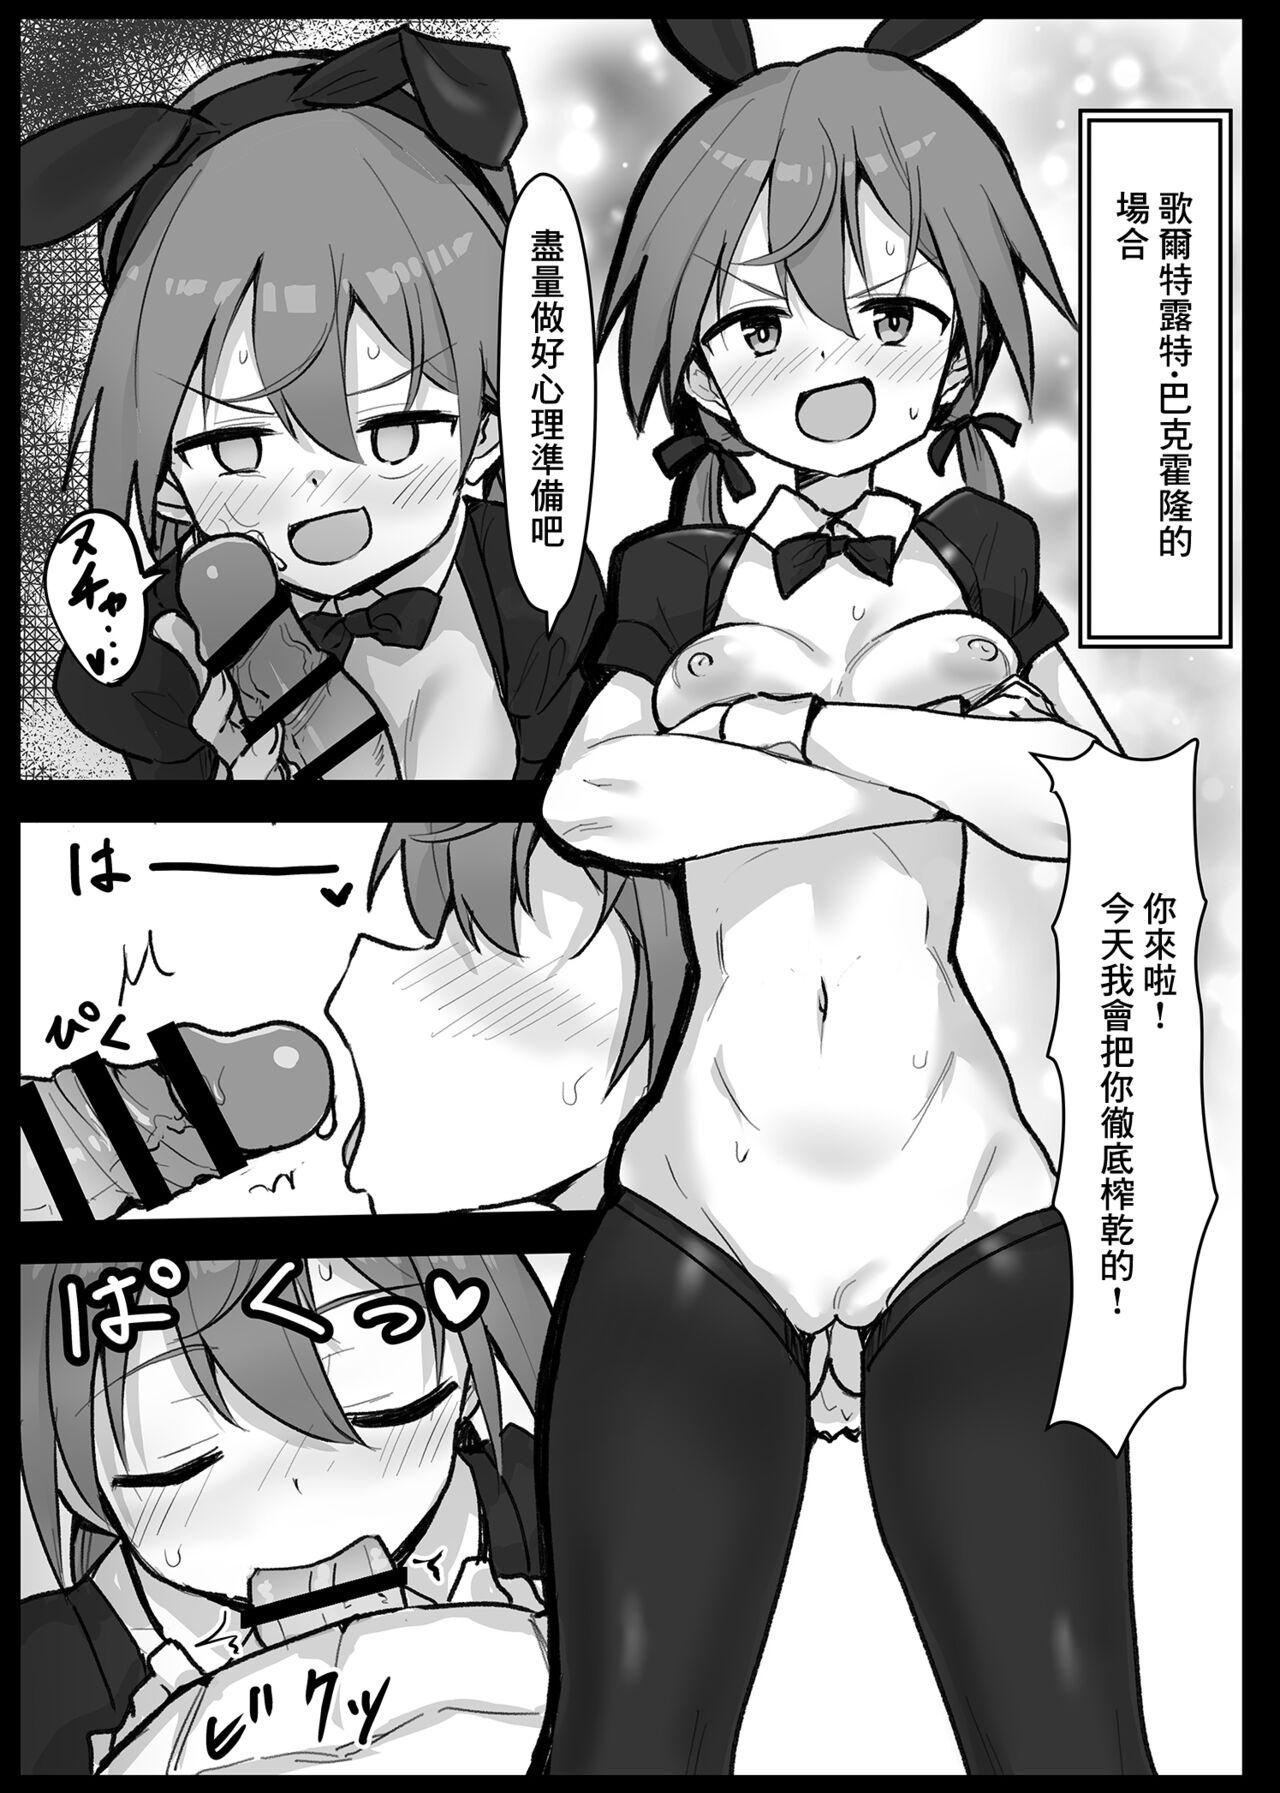 Cosplay Soapland 501 e Youkoso! - Strike witches Bottom - Page 3